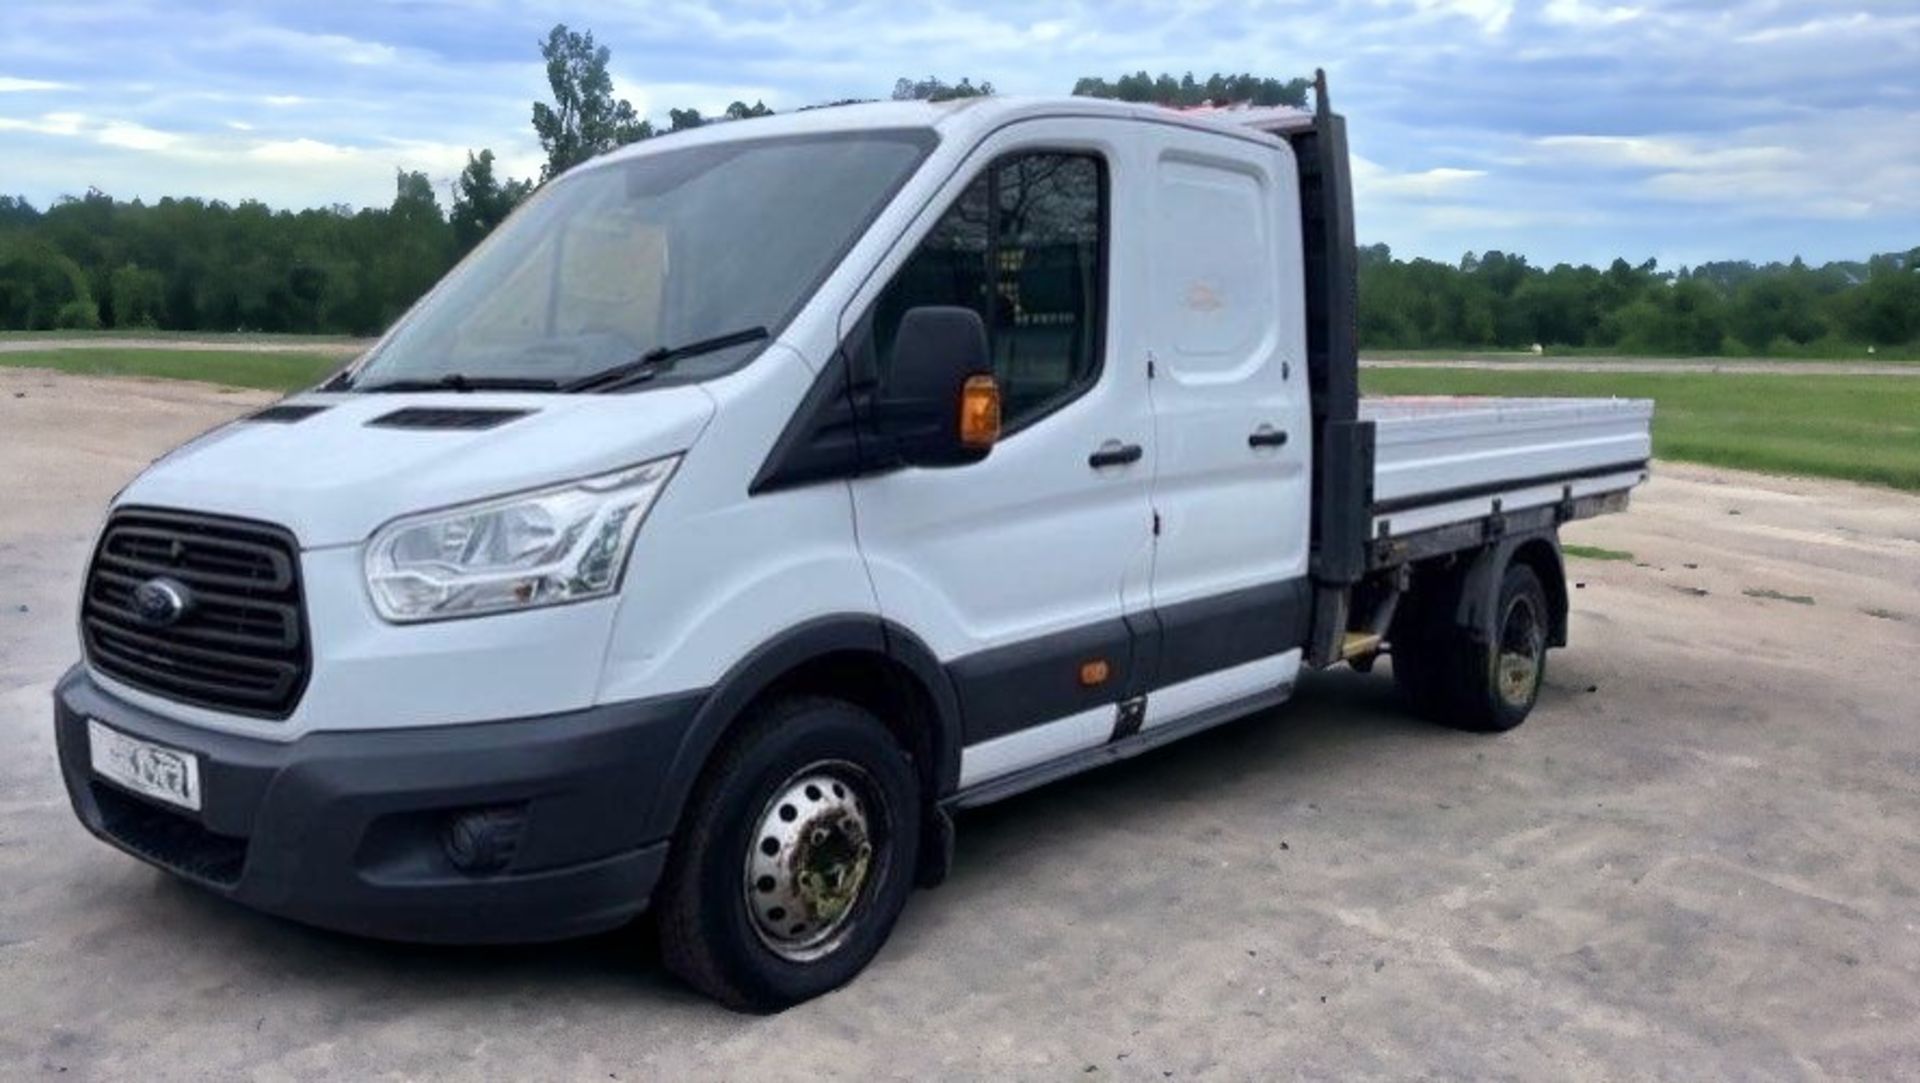 **SPARES OR REPAIRS** 2016 FORD TRANSIT T350 CREWCAB DROPSIDE TRUCK - LOW MILEAGE, HIGH POTENTIAL